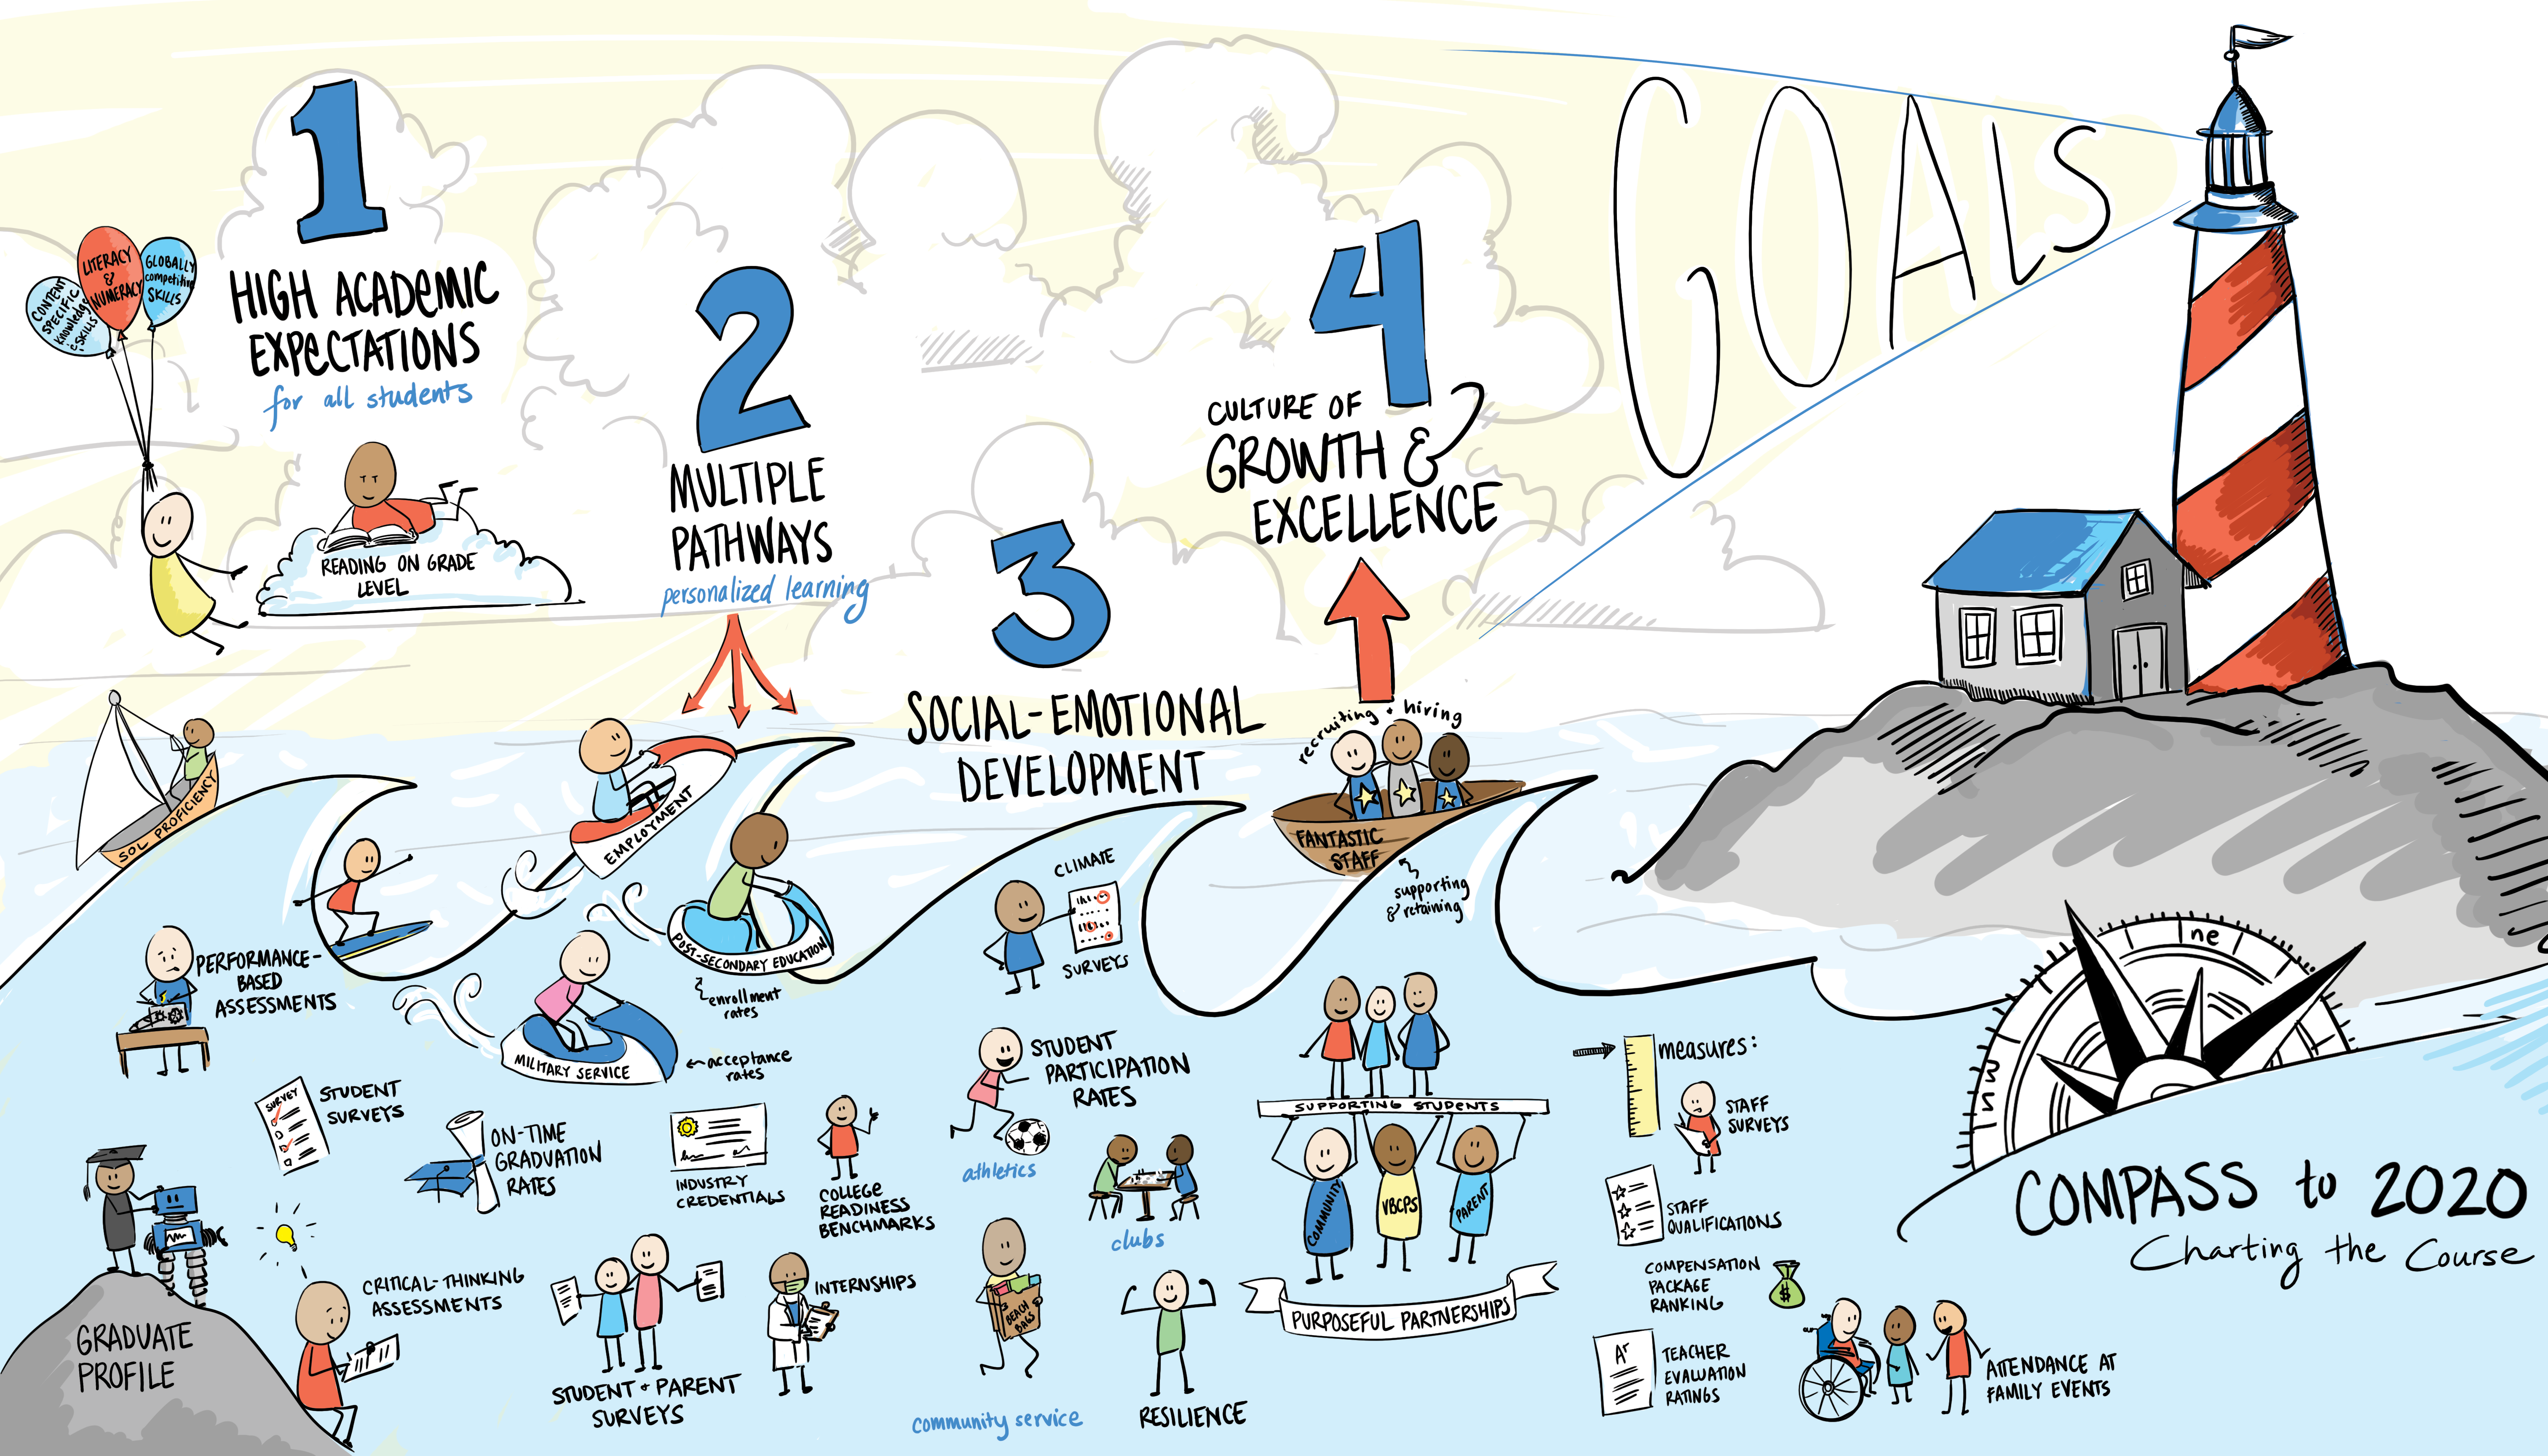 Compass to 2020 Storyboard, 4 Goals: High Academic Expectations for all students, Multiple Pathways, Social-Emotional Development, and Culture of Growth and Excellence